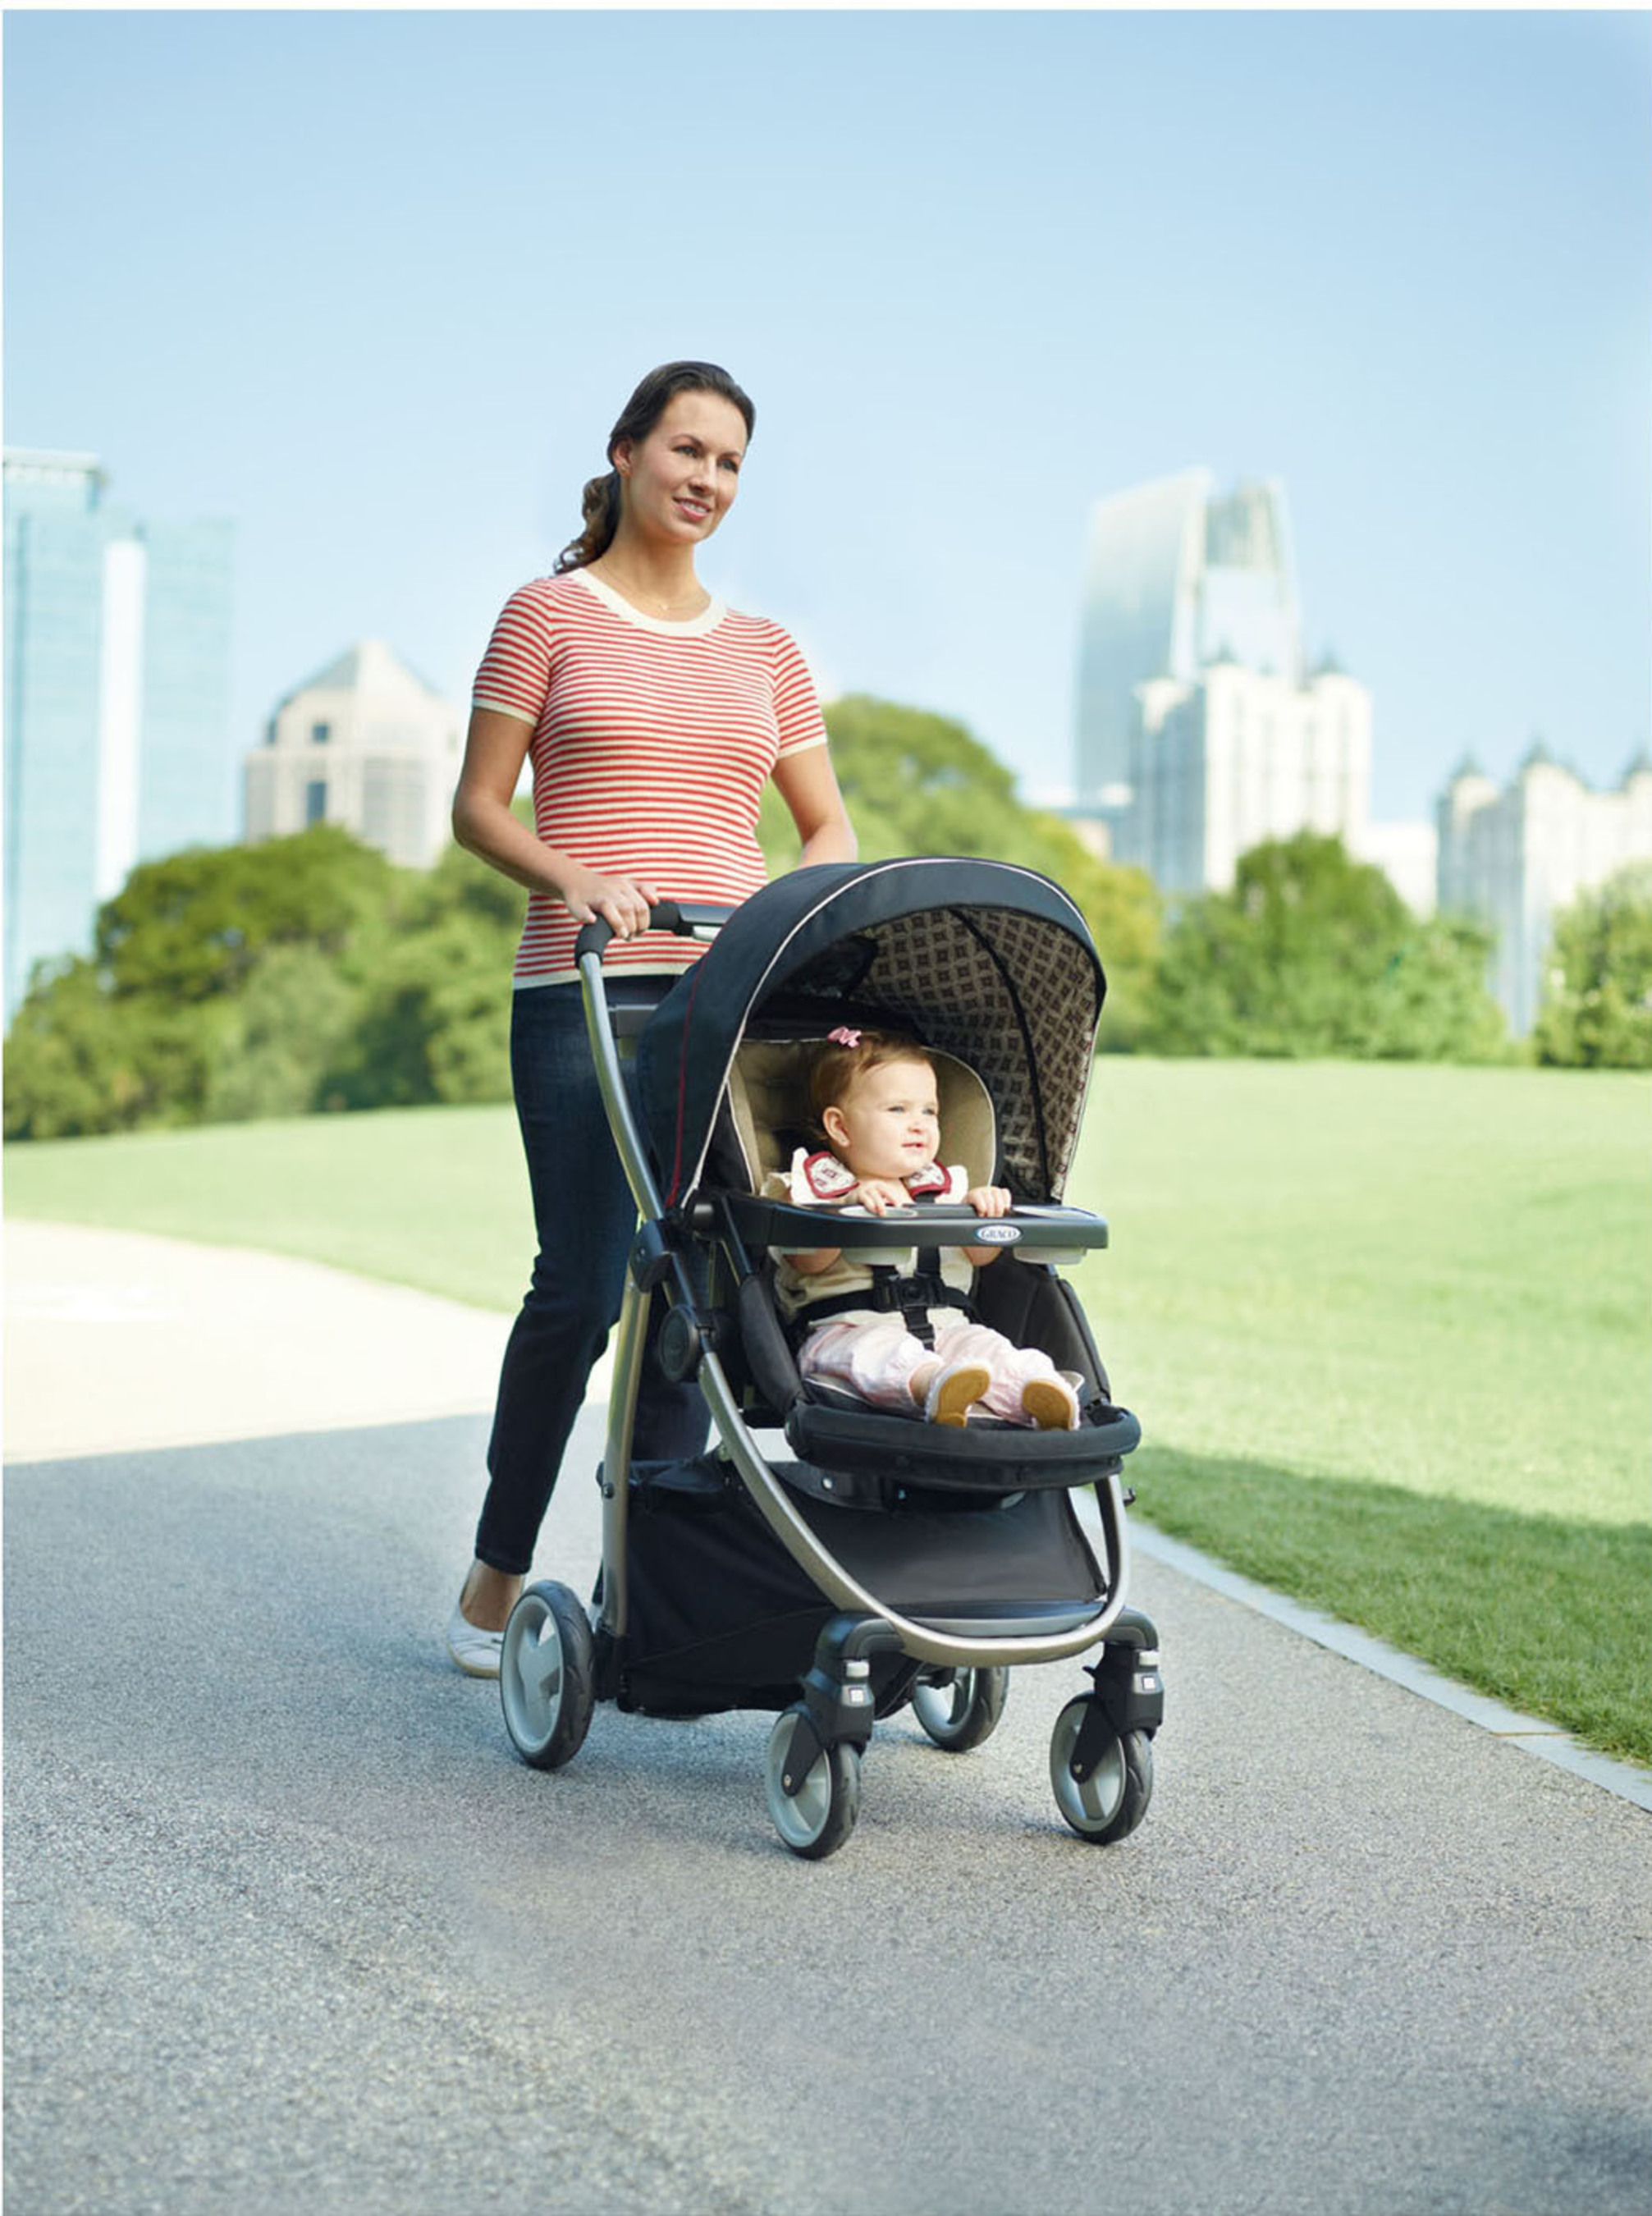 The Graco Modes Click Connect travel system is three strollers in one -- offering the versatility and value of an infant car seat carrier, an infant stroller and a toddler stroller. (PRNewsFoto/Graco) (PRNewsFoto/GRACO)